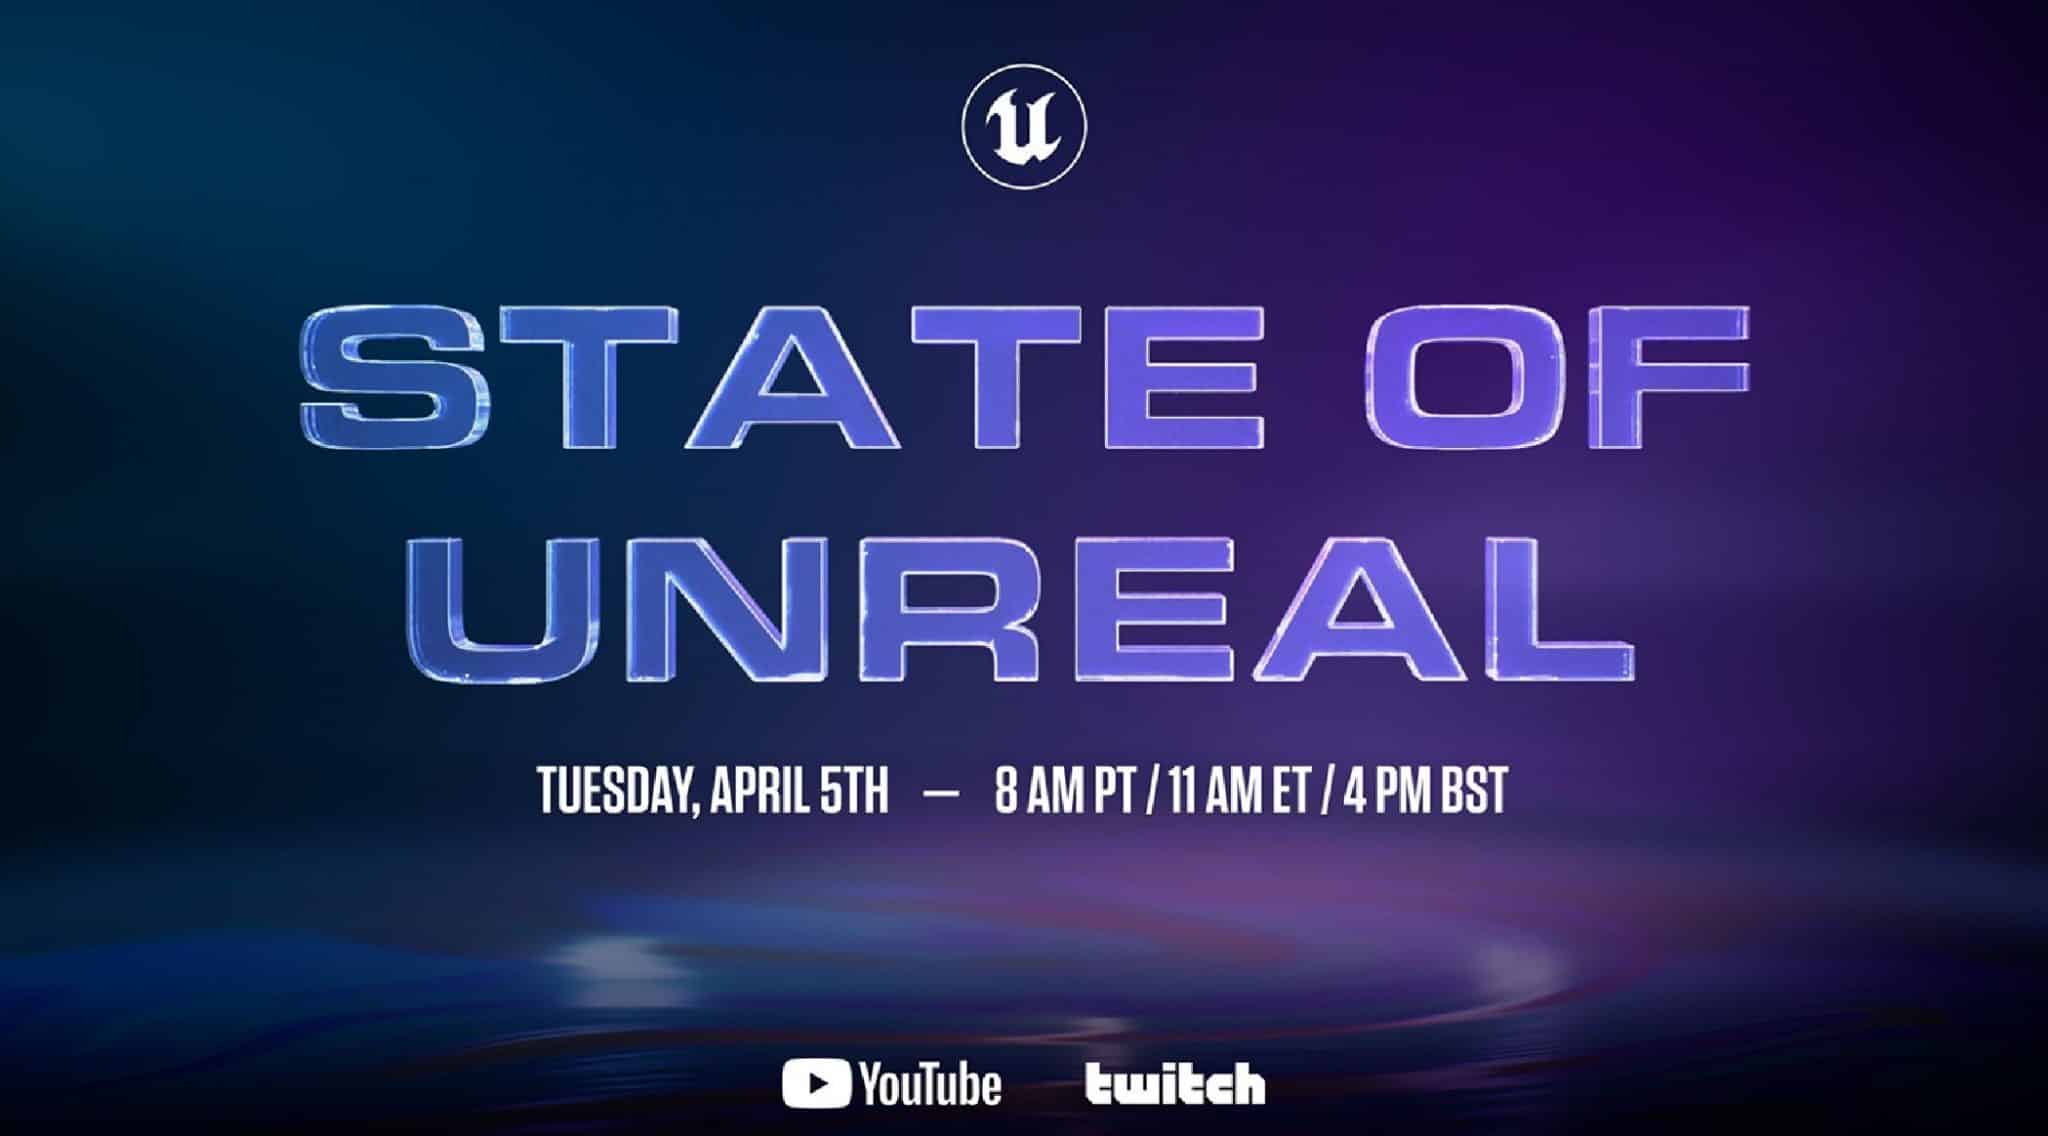 State of Unreal Epic Games stream